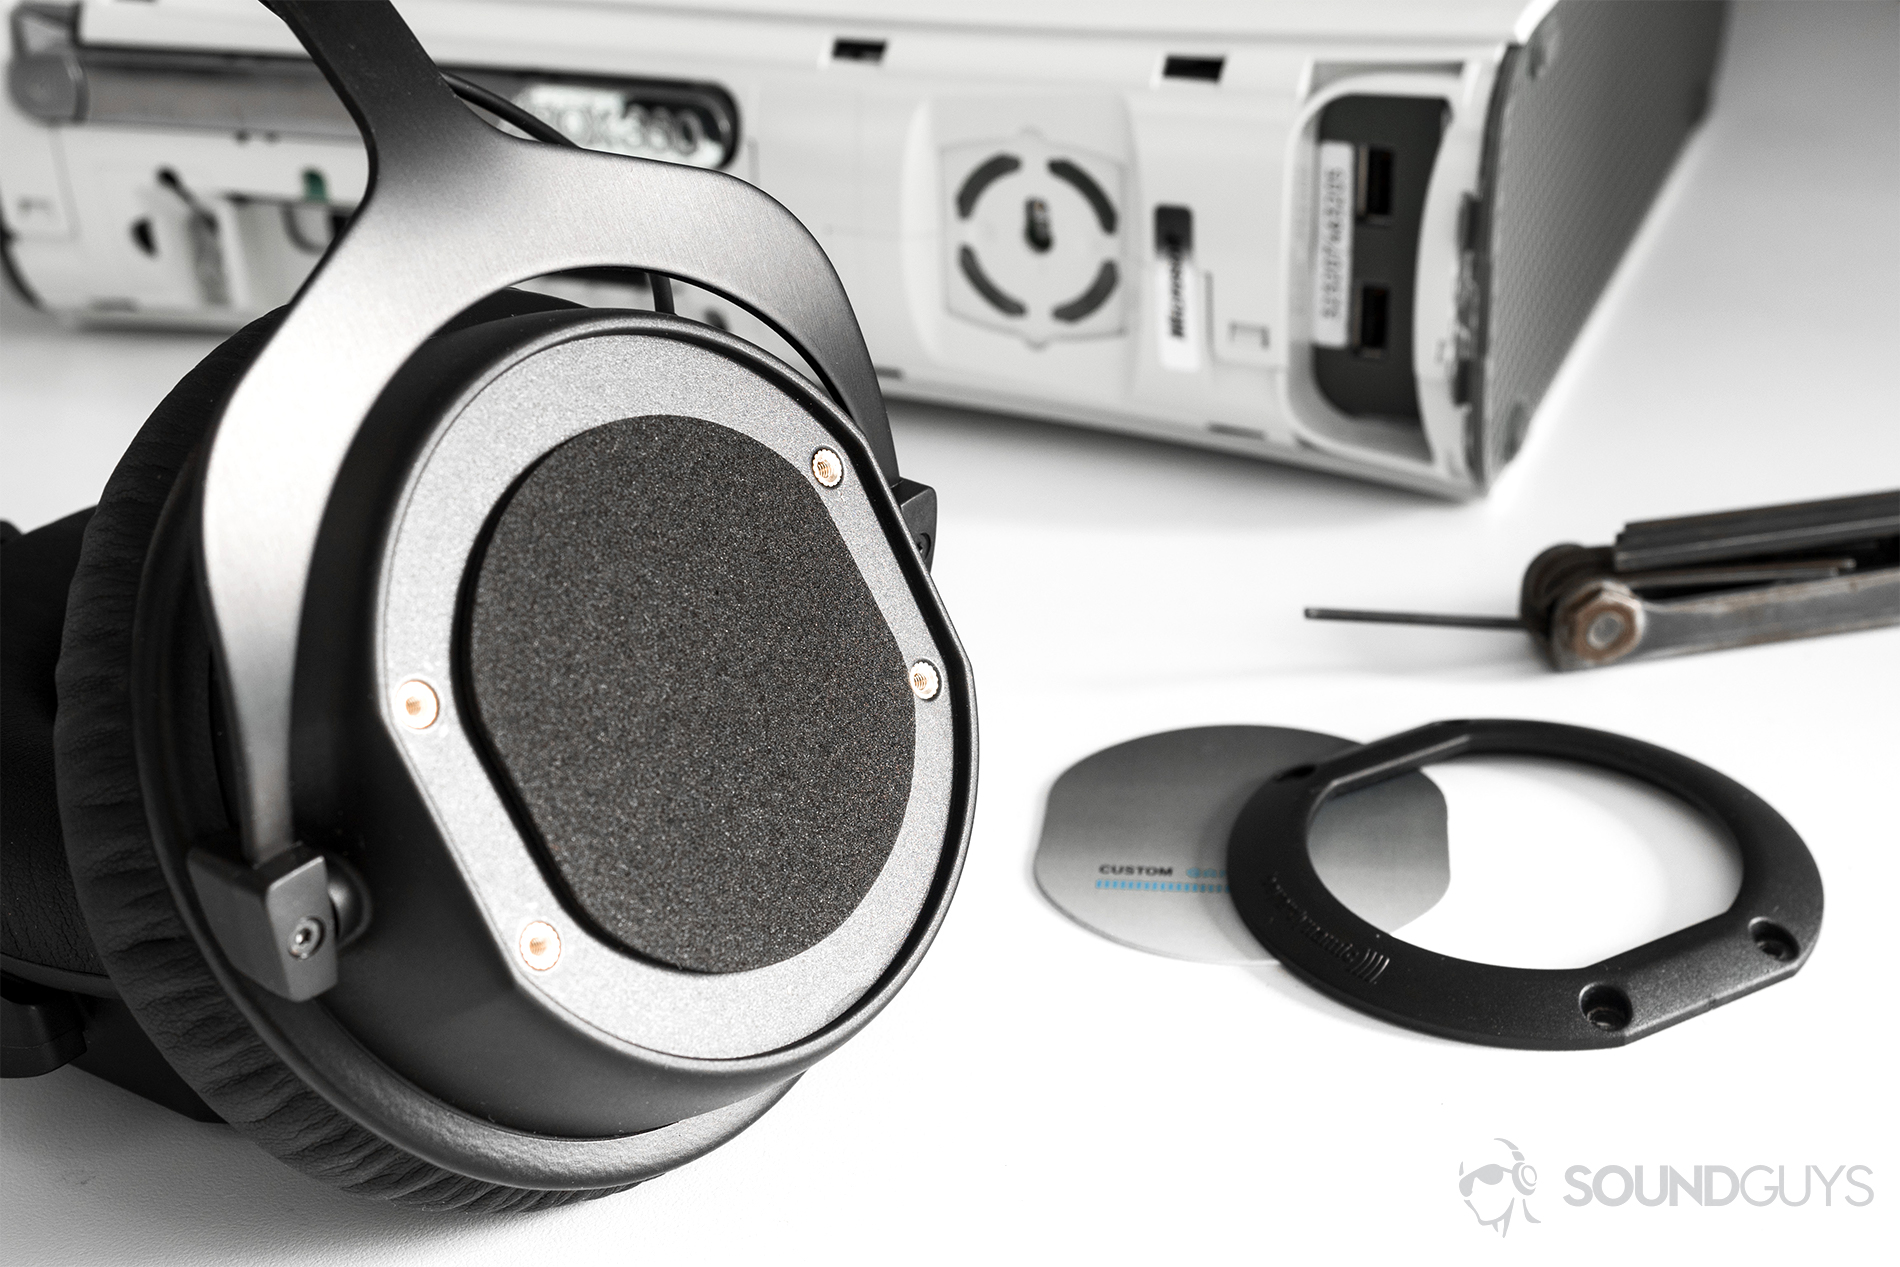 Beyerdynamic CUSTOM Game: The headphones are angled off to the side, unsheathed to replace the ear cup plates.